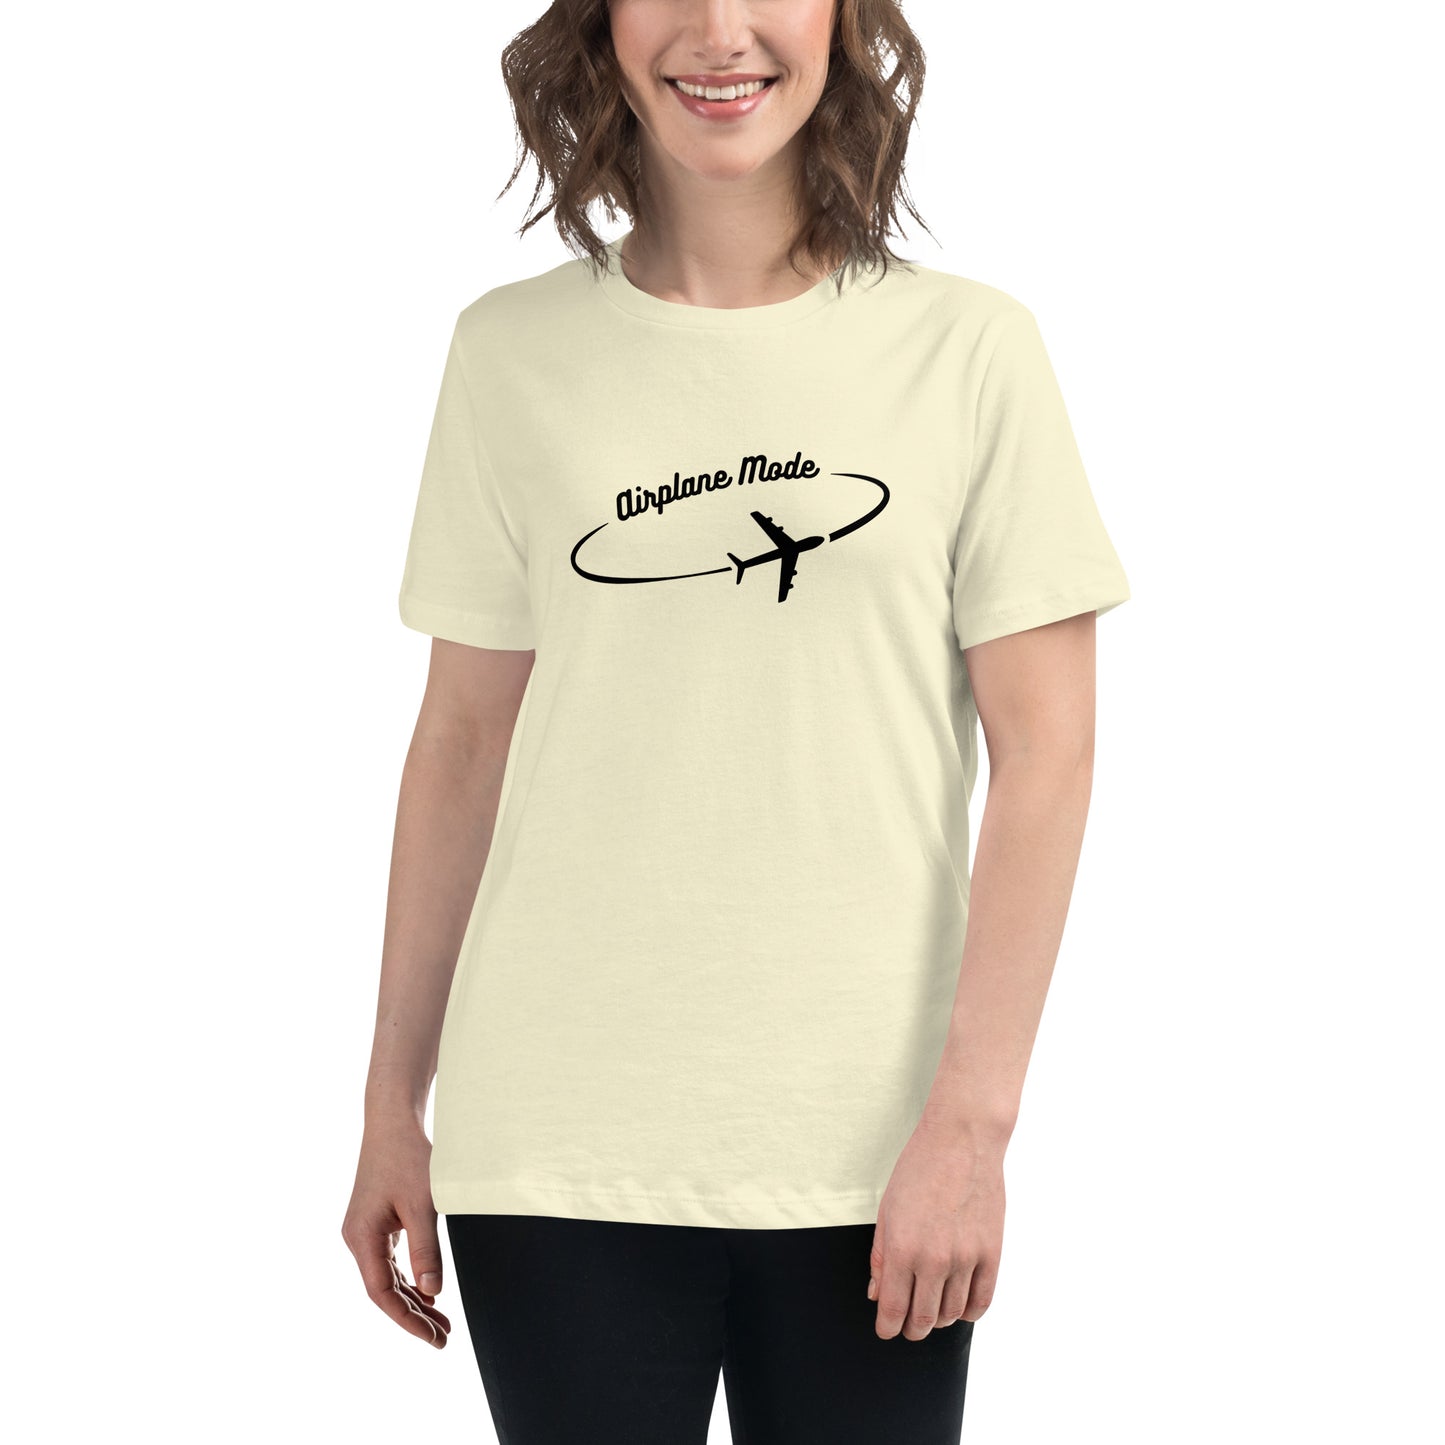 Airplane Mode - Women's Relaxed T-Shirt - Black Letters